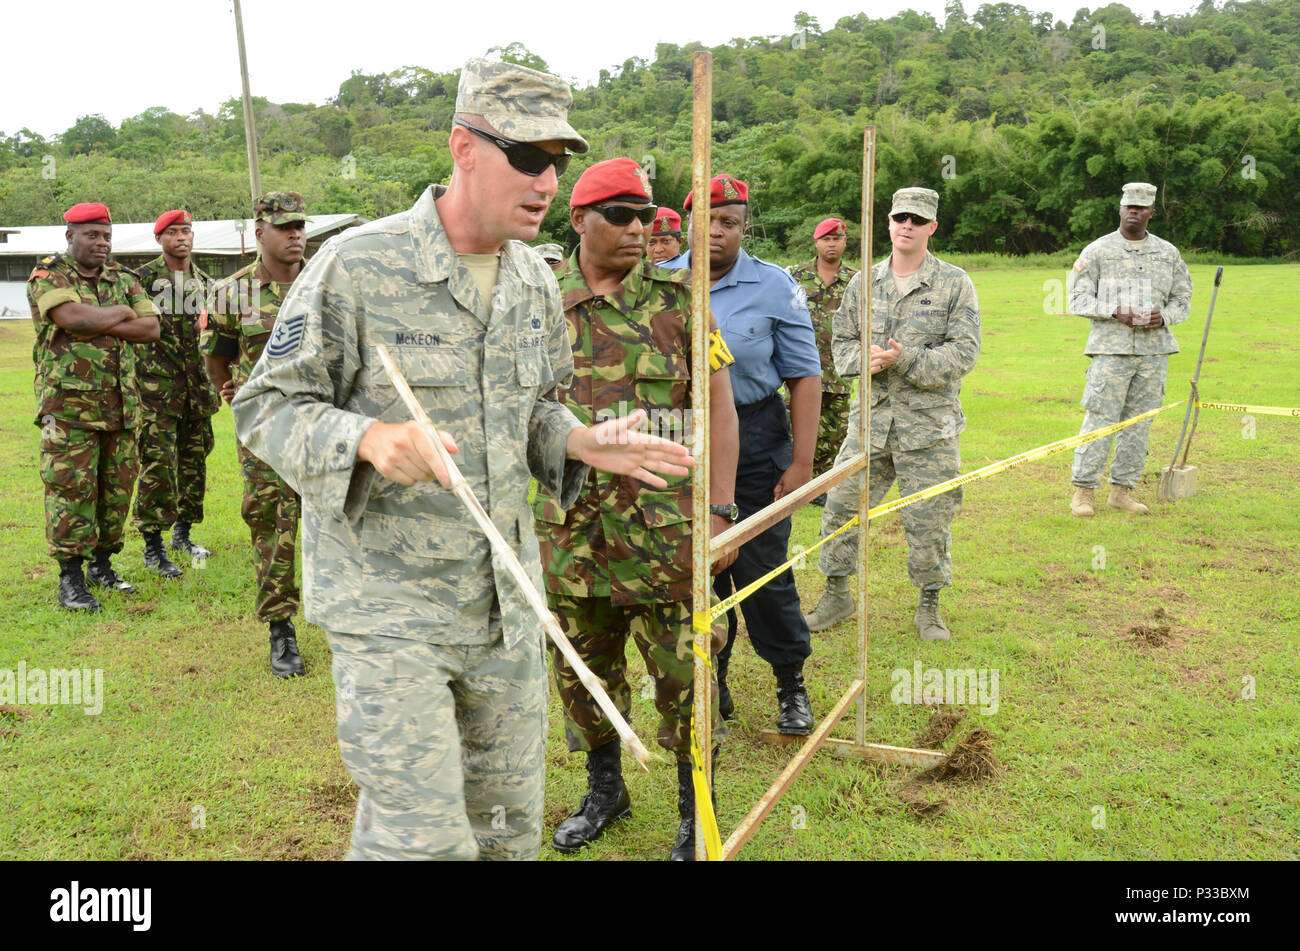 CHAGUARAMAS, Trinidad- Tech. Sgt. Michael Mckeon, fire team leader, 166th Security Forces Squadron, oversees training progression of room clearance procedures as participants of the Trinidad and Tobago Defence Force Reserves practice procedures on Aug. 10, 2016. (U.S. Air National Guard photo by Tech. Sgt. Gwendolyn Blakley/ Released). Stock Photo